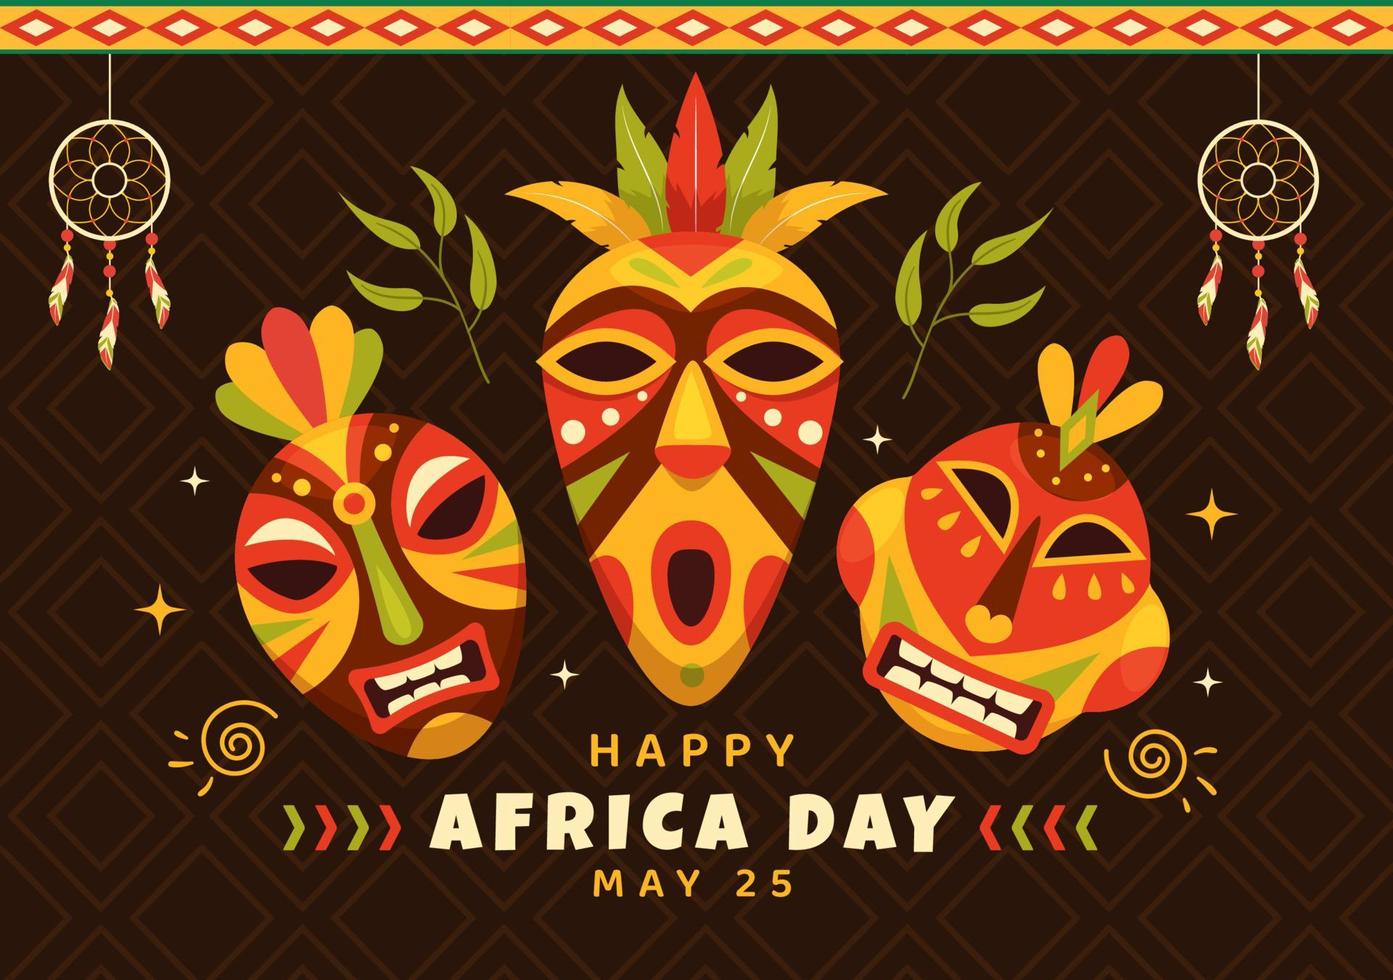 Happy Africa Day on 25 May Illustration with Culture African Tribal Figures in Flat Cartoon Hand Drawn for Web Banner or Landing Page Templates vector